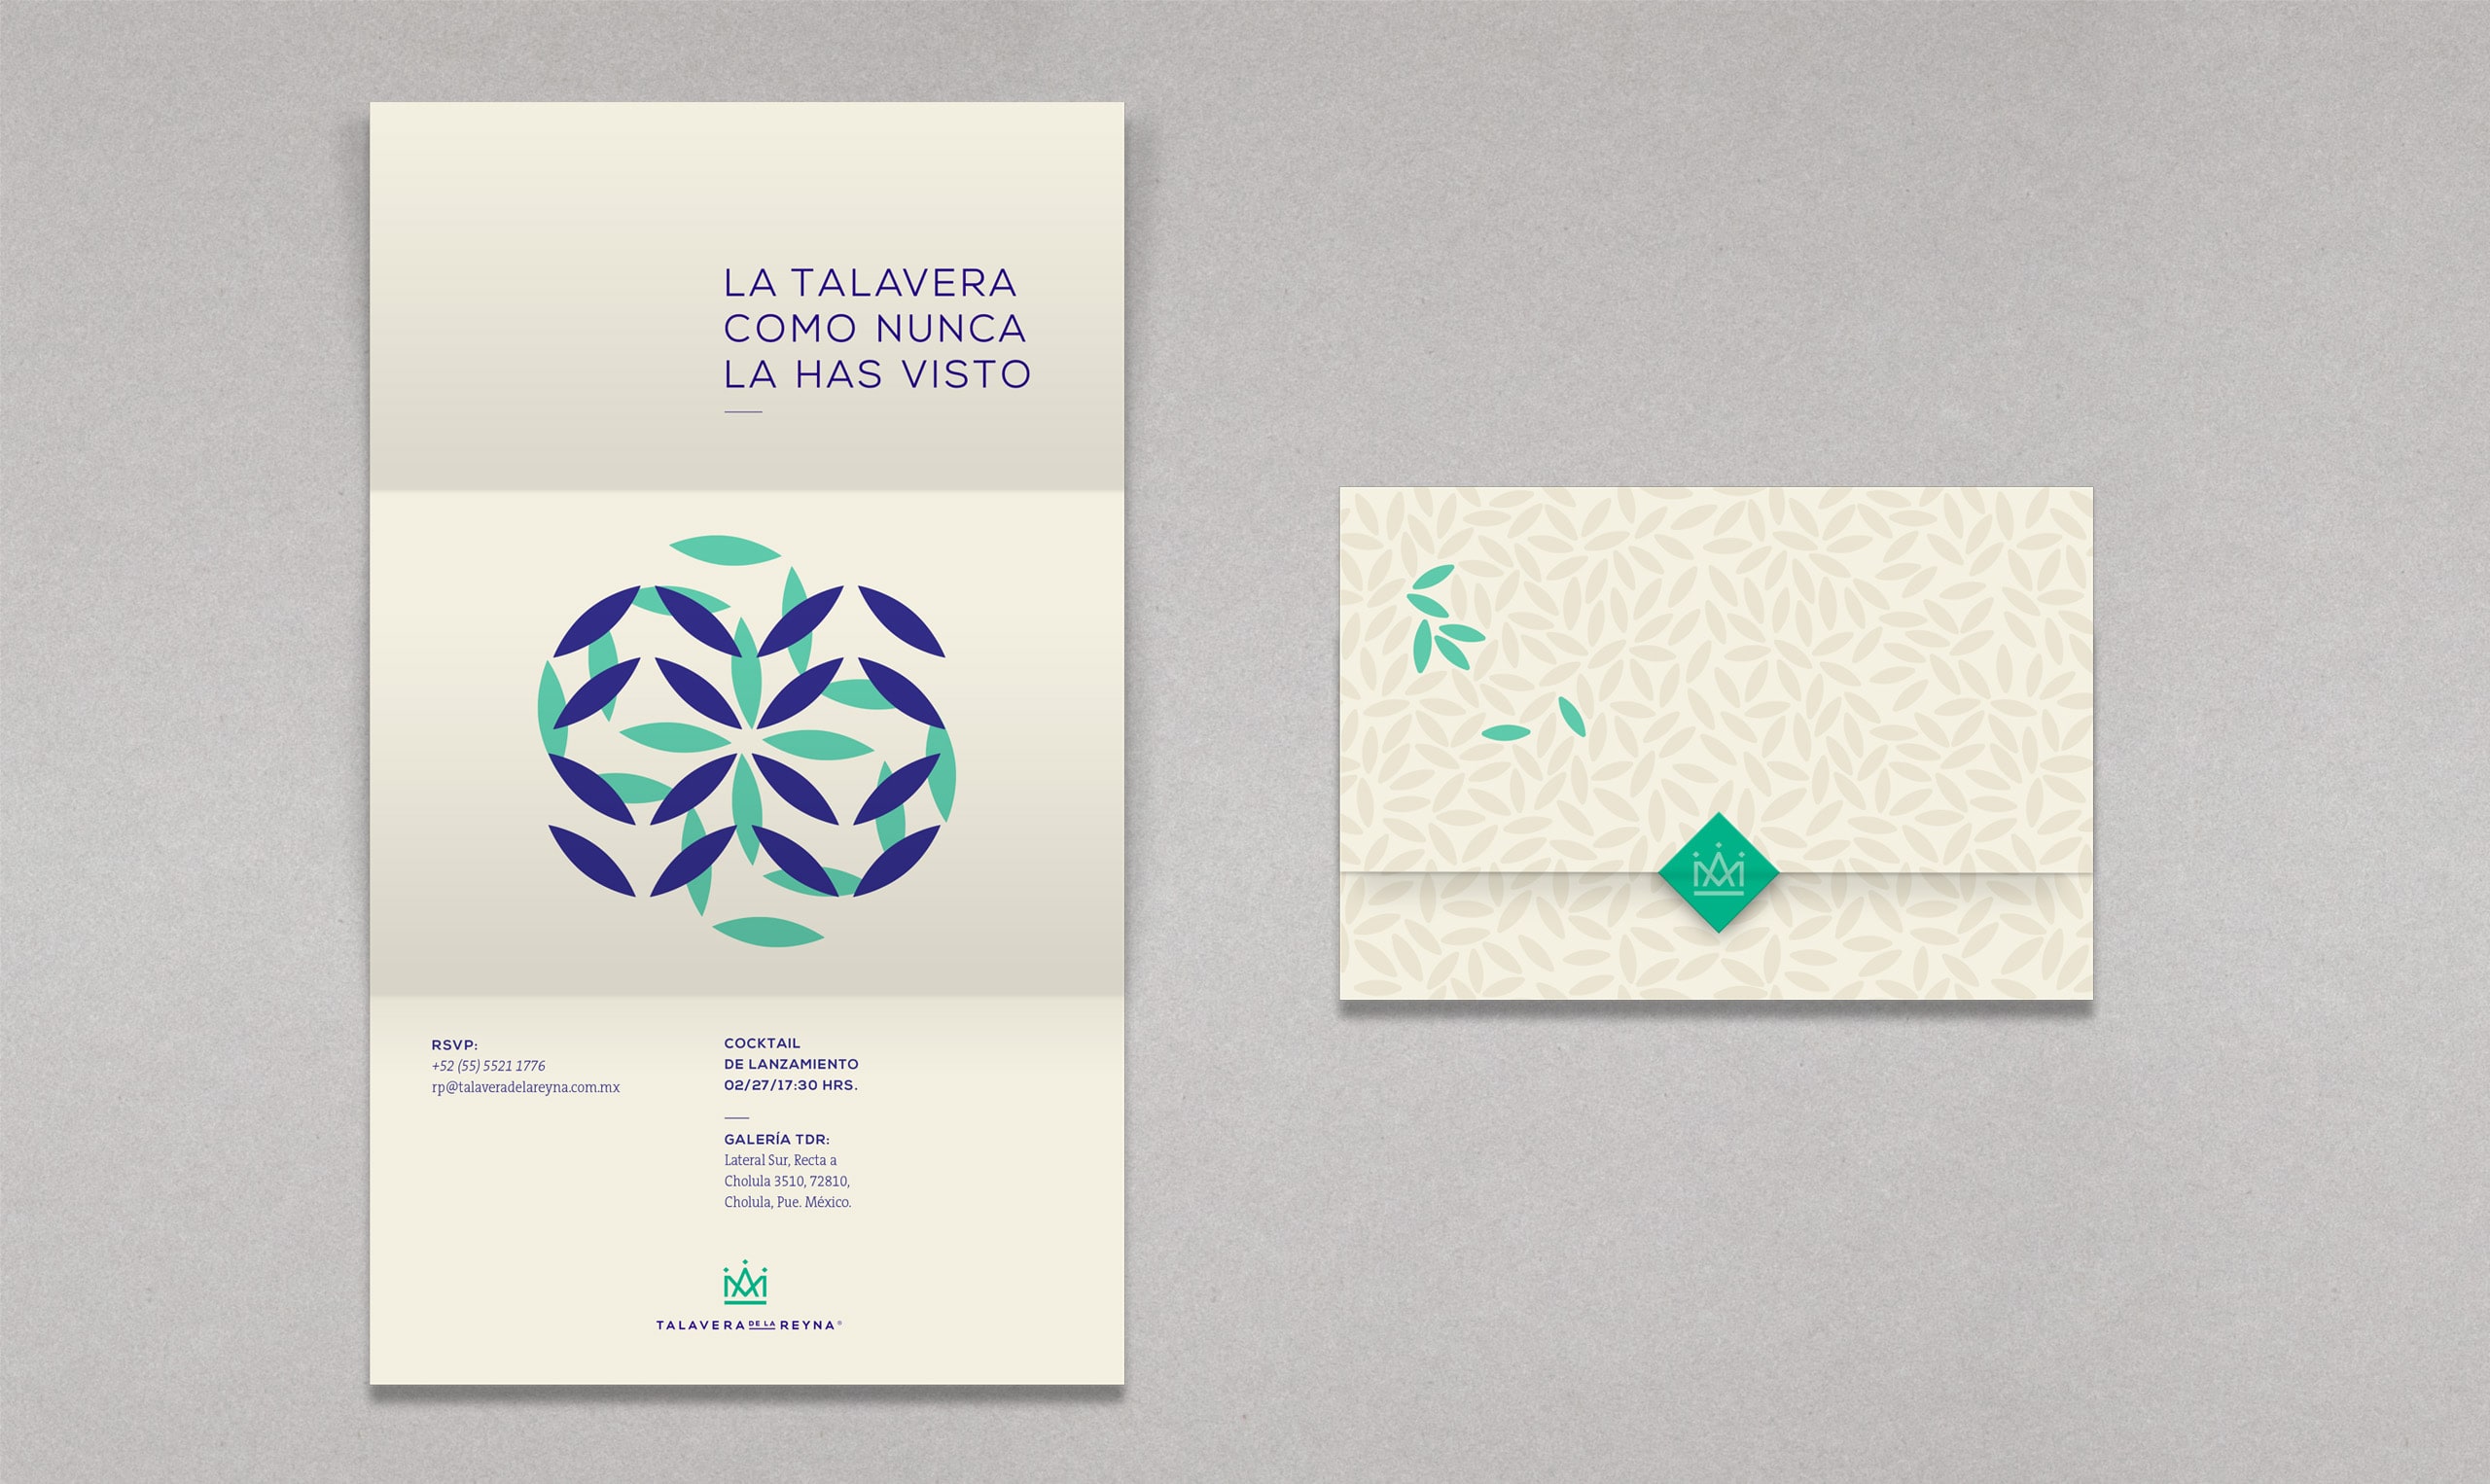 A card with a green and white design fusing royal tradition.